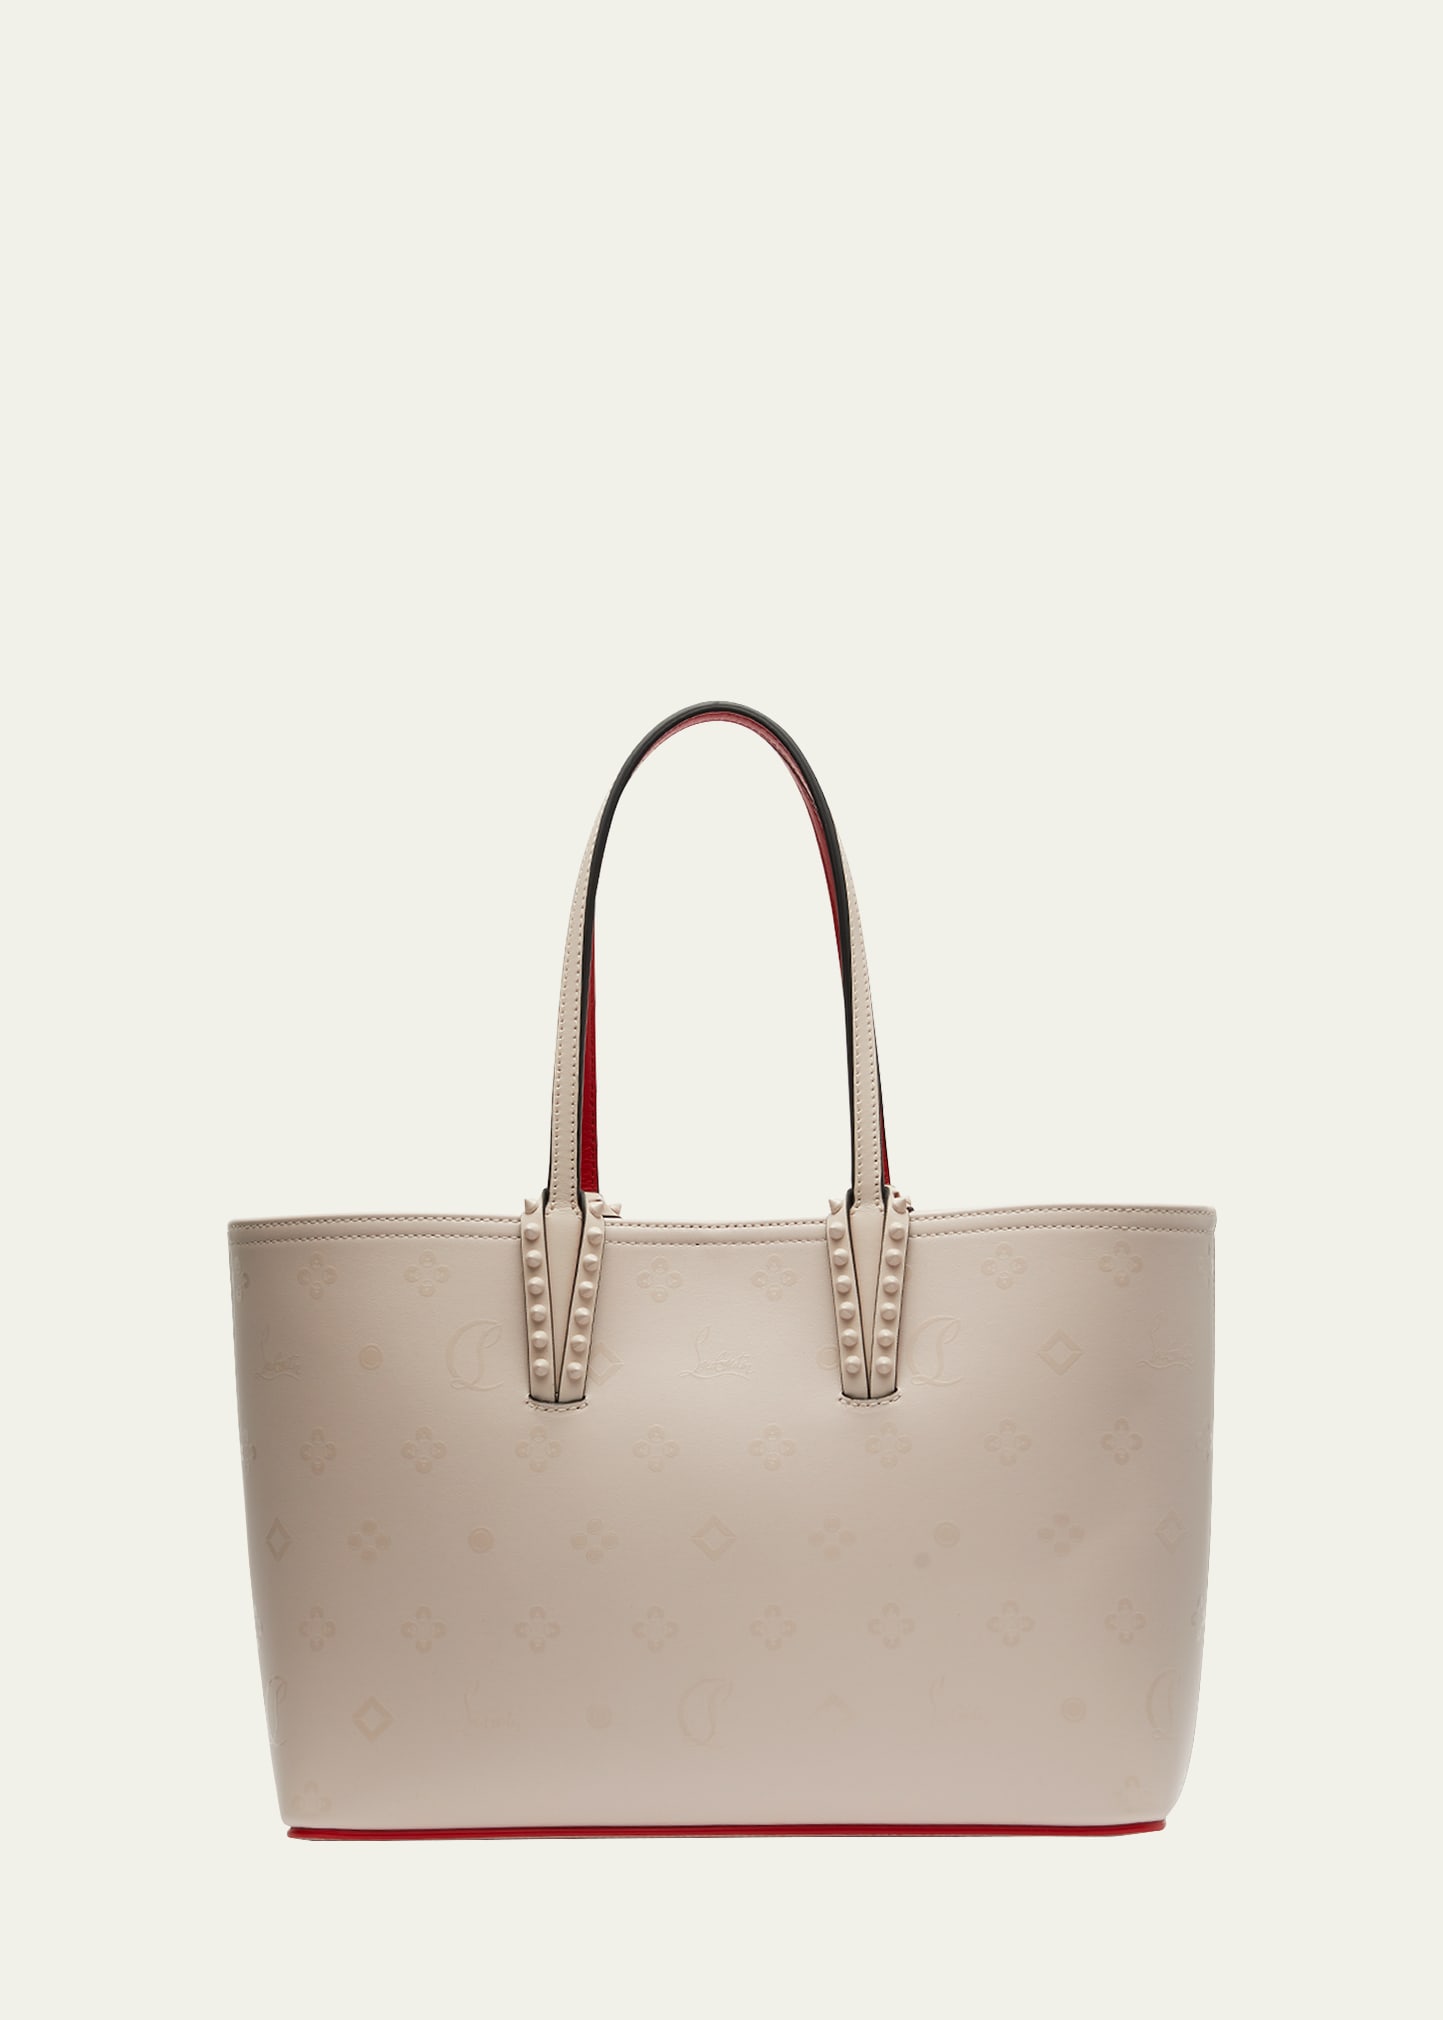 Cabata Small Tote in Loubinthesky Print Leather